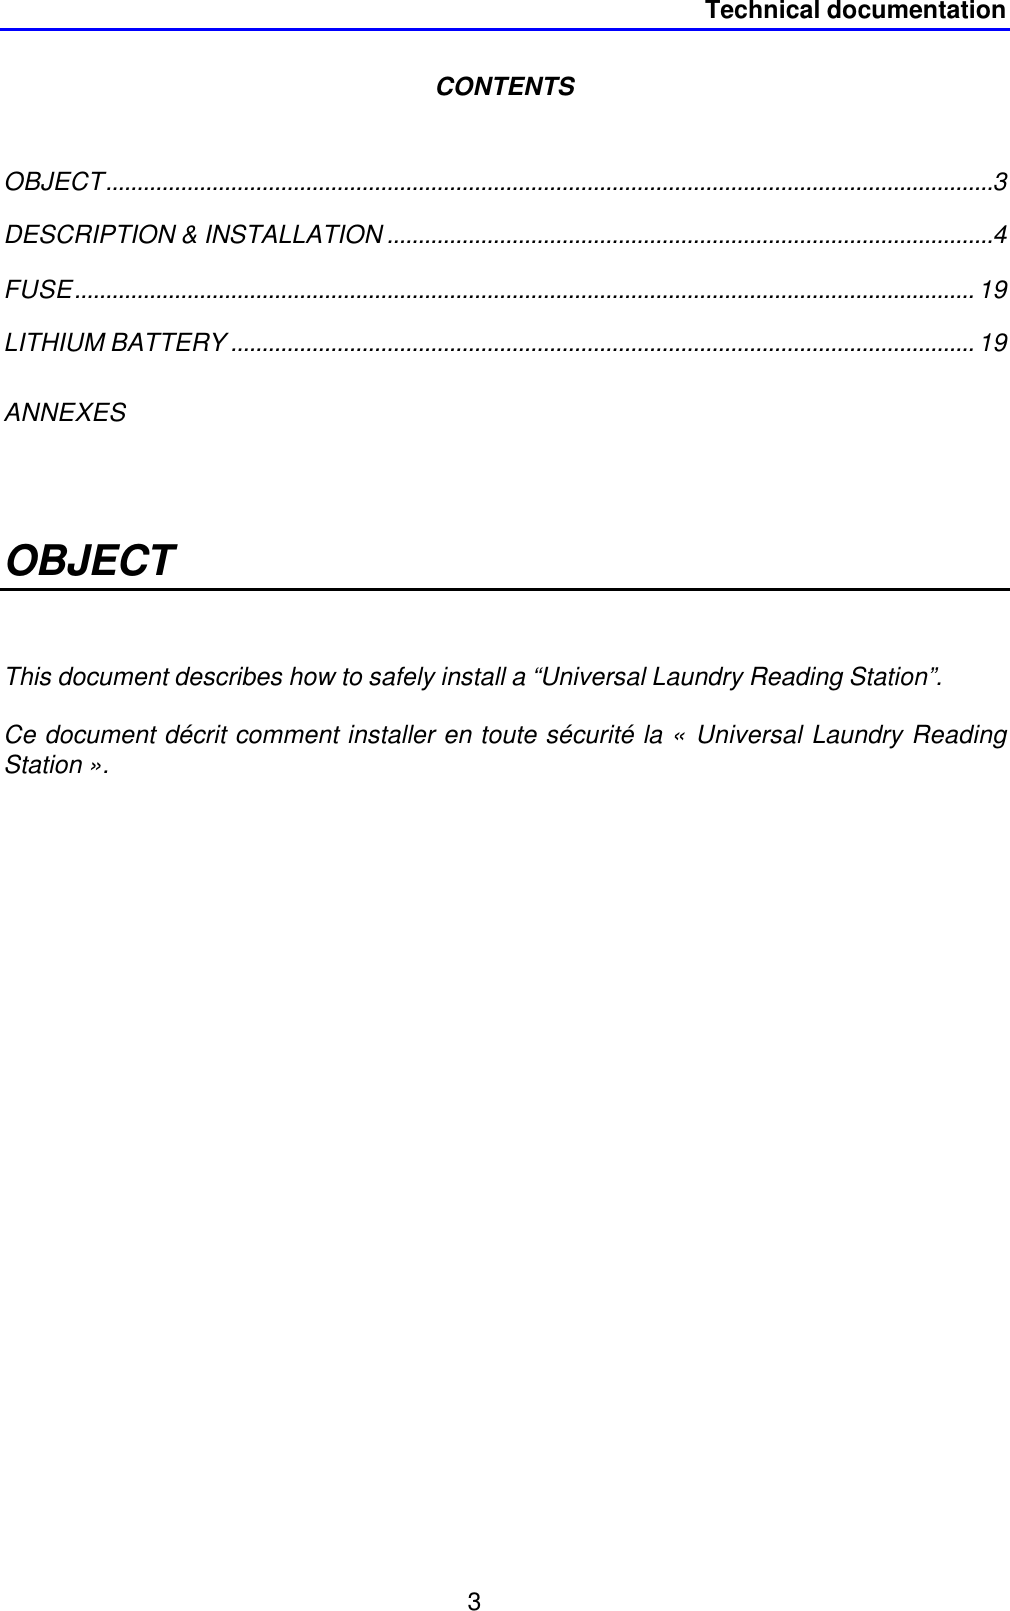 Technical documentation3CONTENTSOBJECT..............................................................................................................................................3DESCRIPTION &amp; INSTALLATION .................................................................................................4FUSE................................................................................................................................................ 19LITHIUM BATTERY ....................................................................................................................... 19ANNEXESOBJECTThis document describes how to safely install a “Universal Laundry Reading Station”.Ce document décrit comment installer en toute sécurité la « Universal Laundry ReadingStation ».